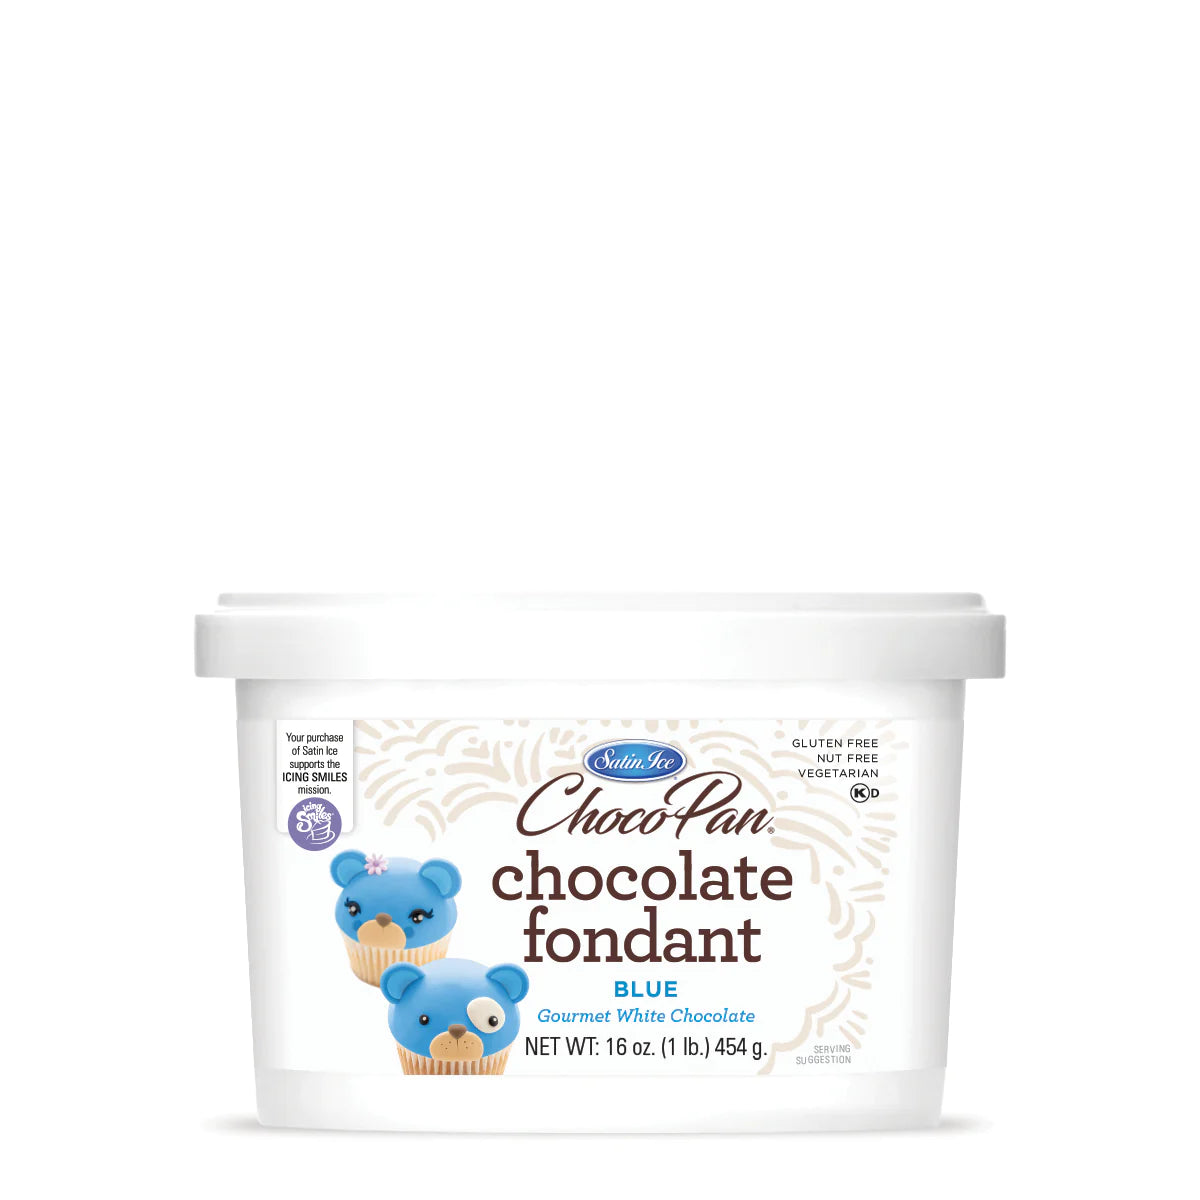 Blue Colored and White Chocolate Flavored Fondant in a 1 Pound Container